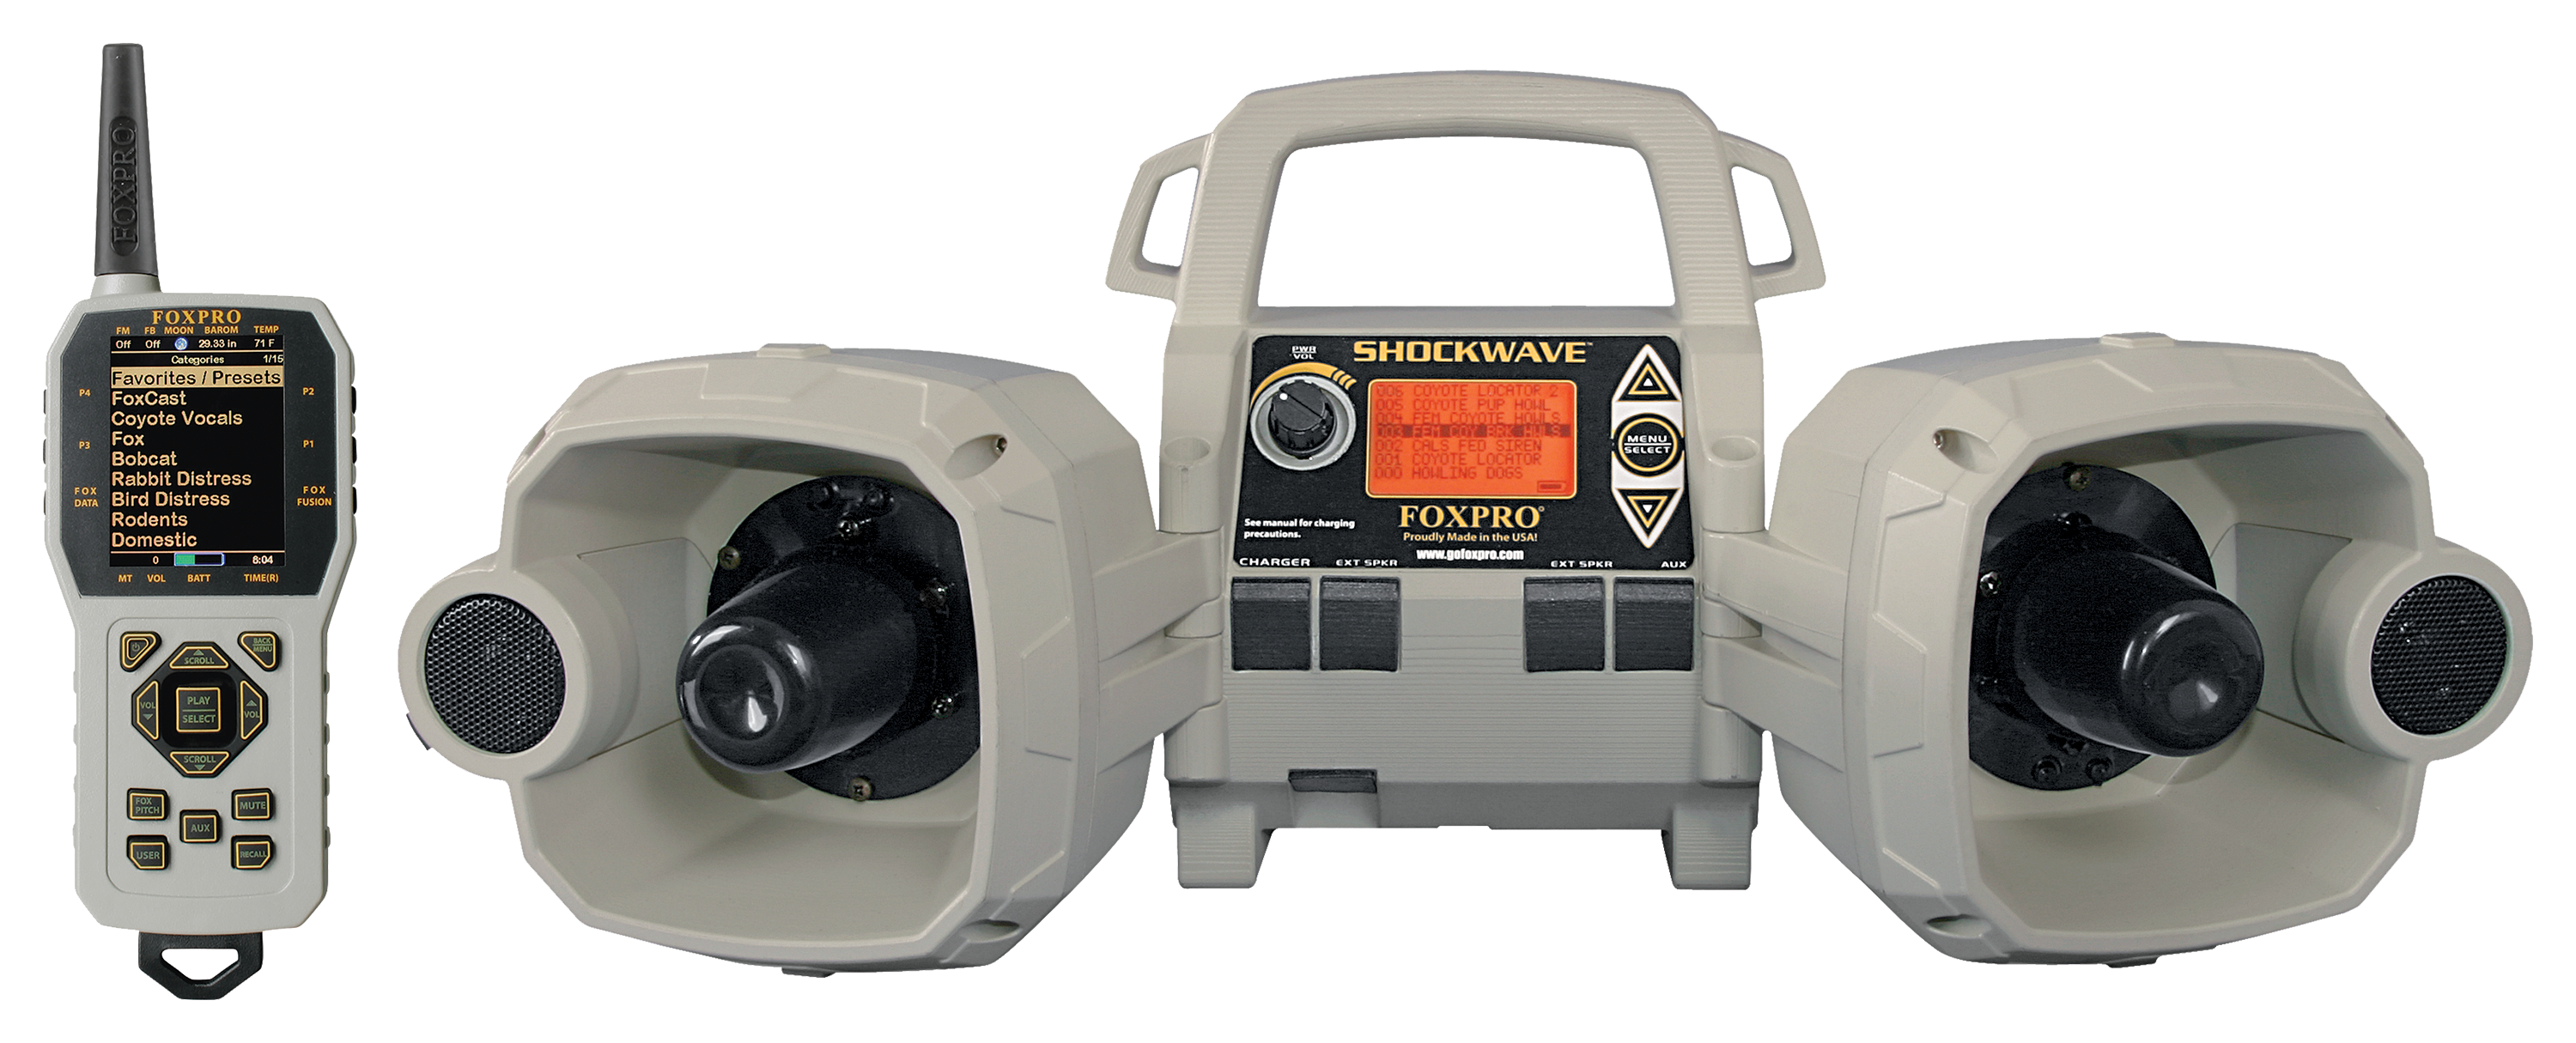 FOXPRO Shockwave Electronic Game Call